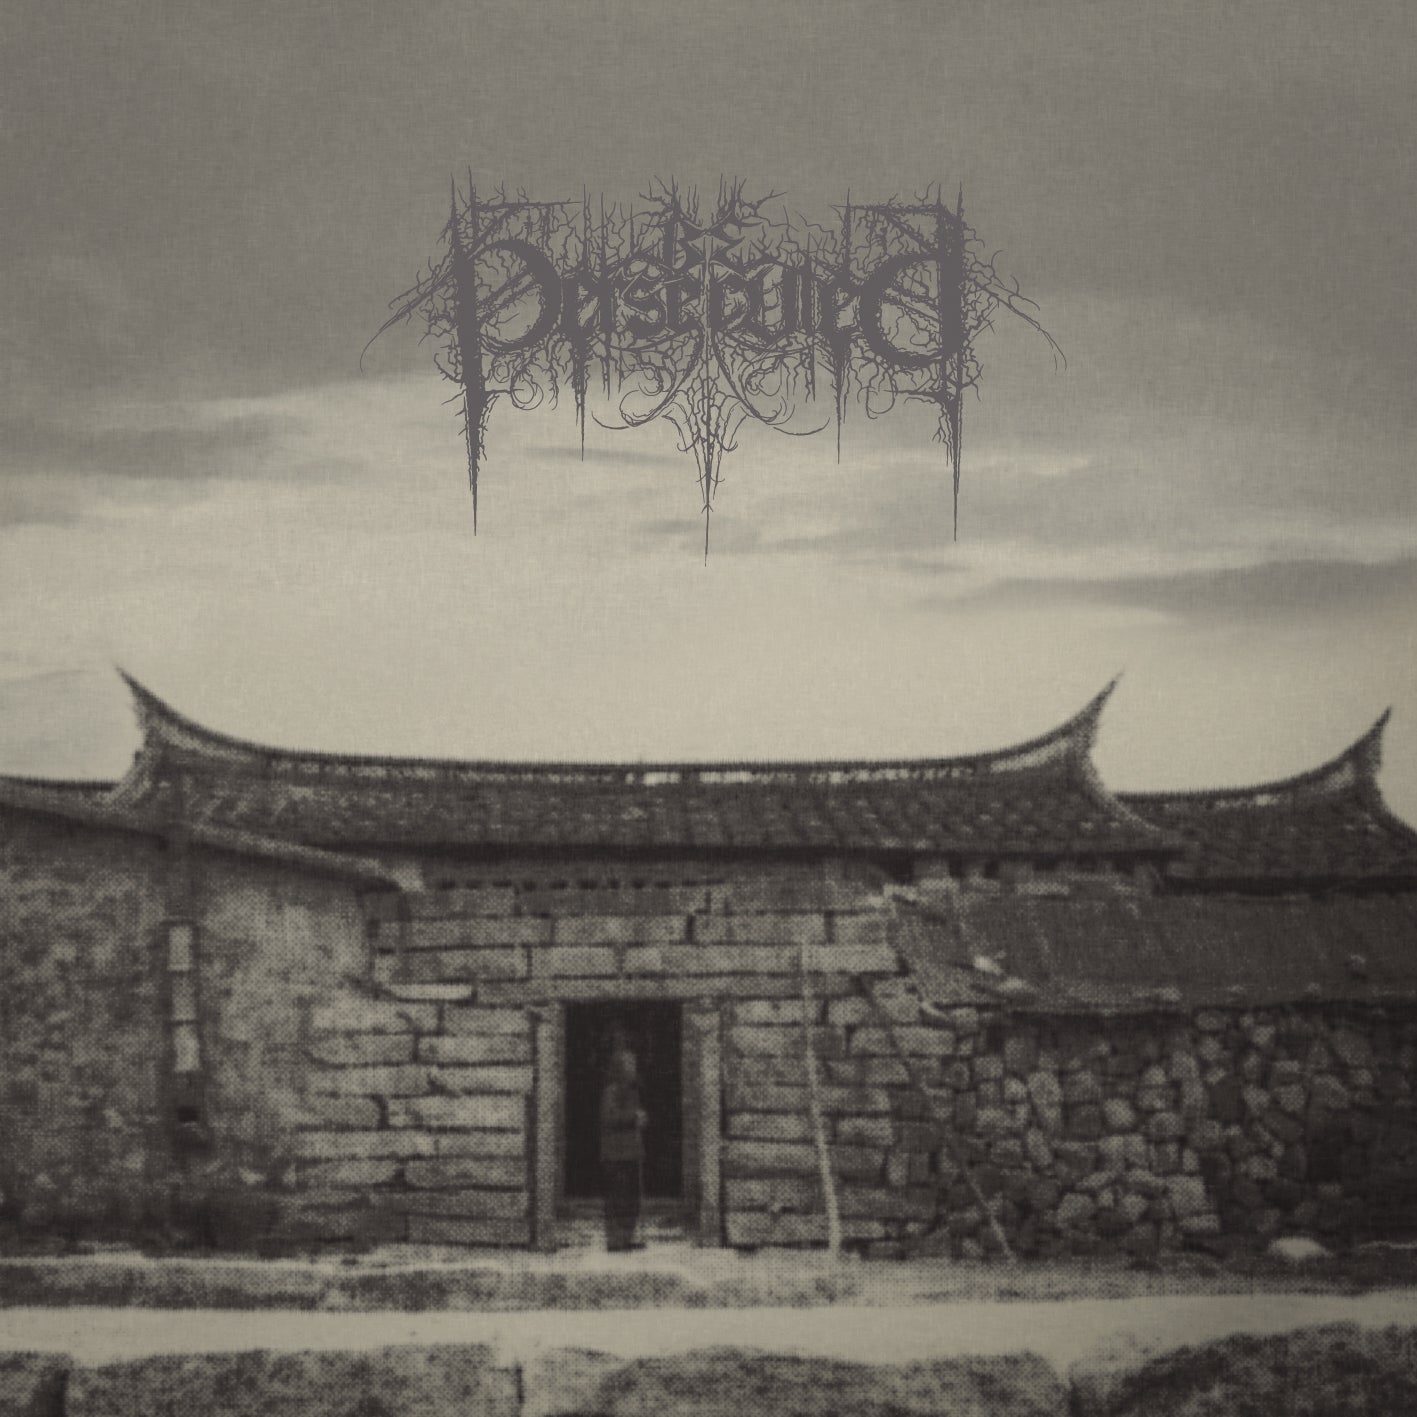 Be Persecuted - III - Mini CD (limited to 500 handnumbered copies)